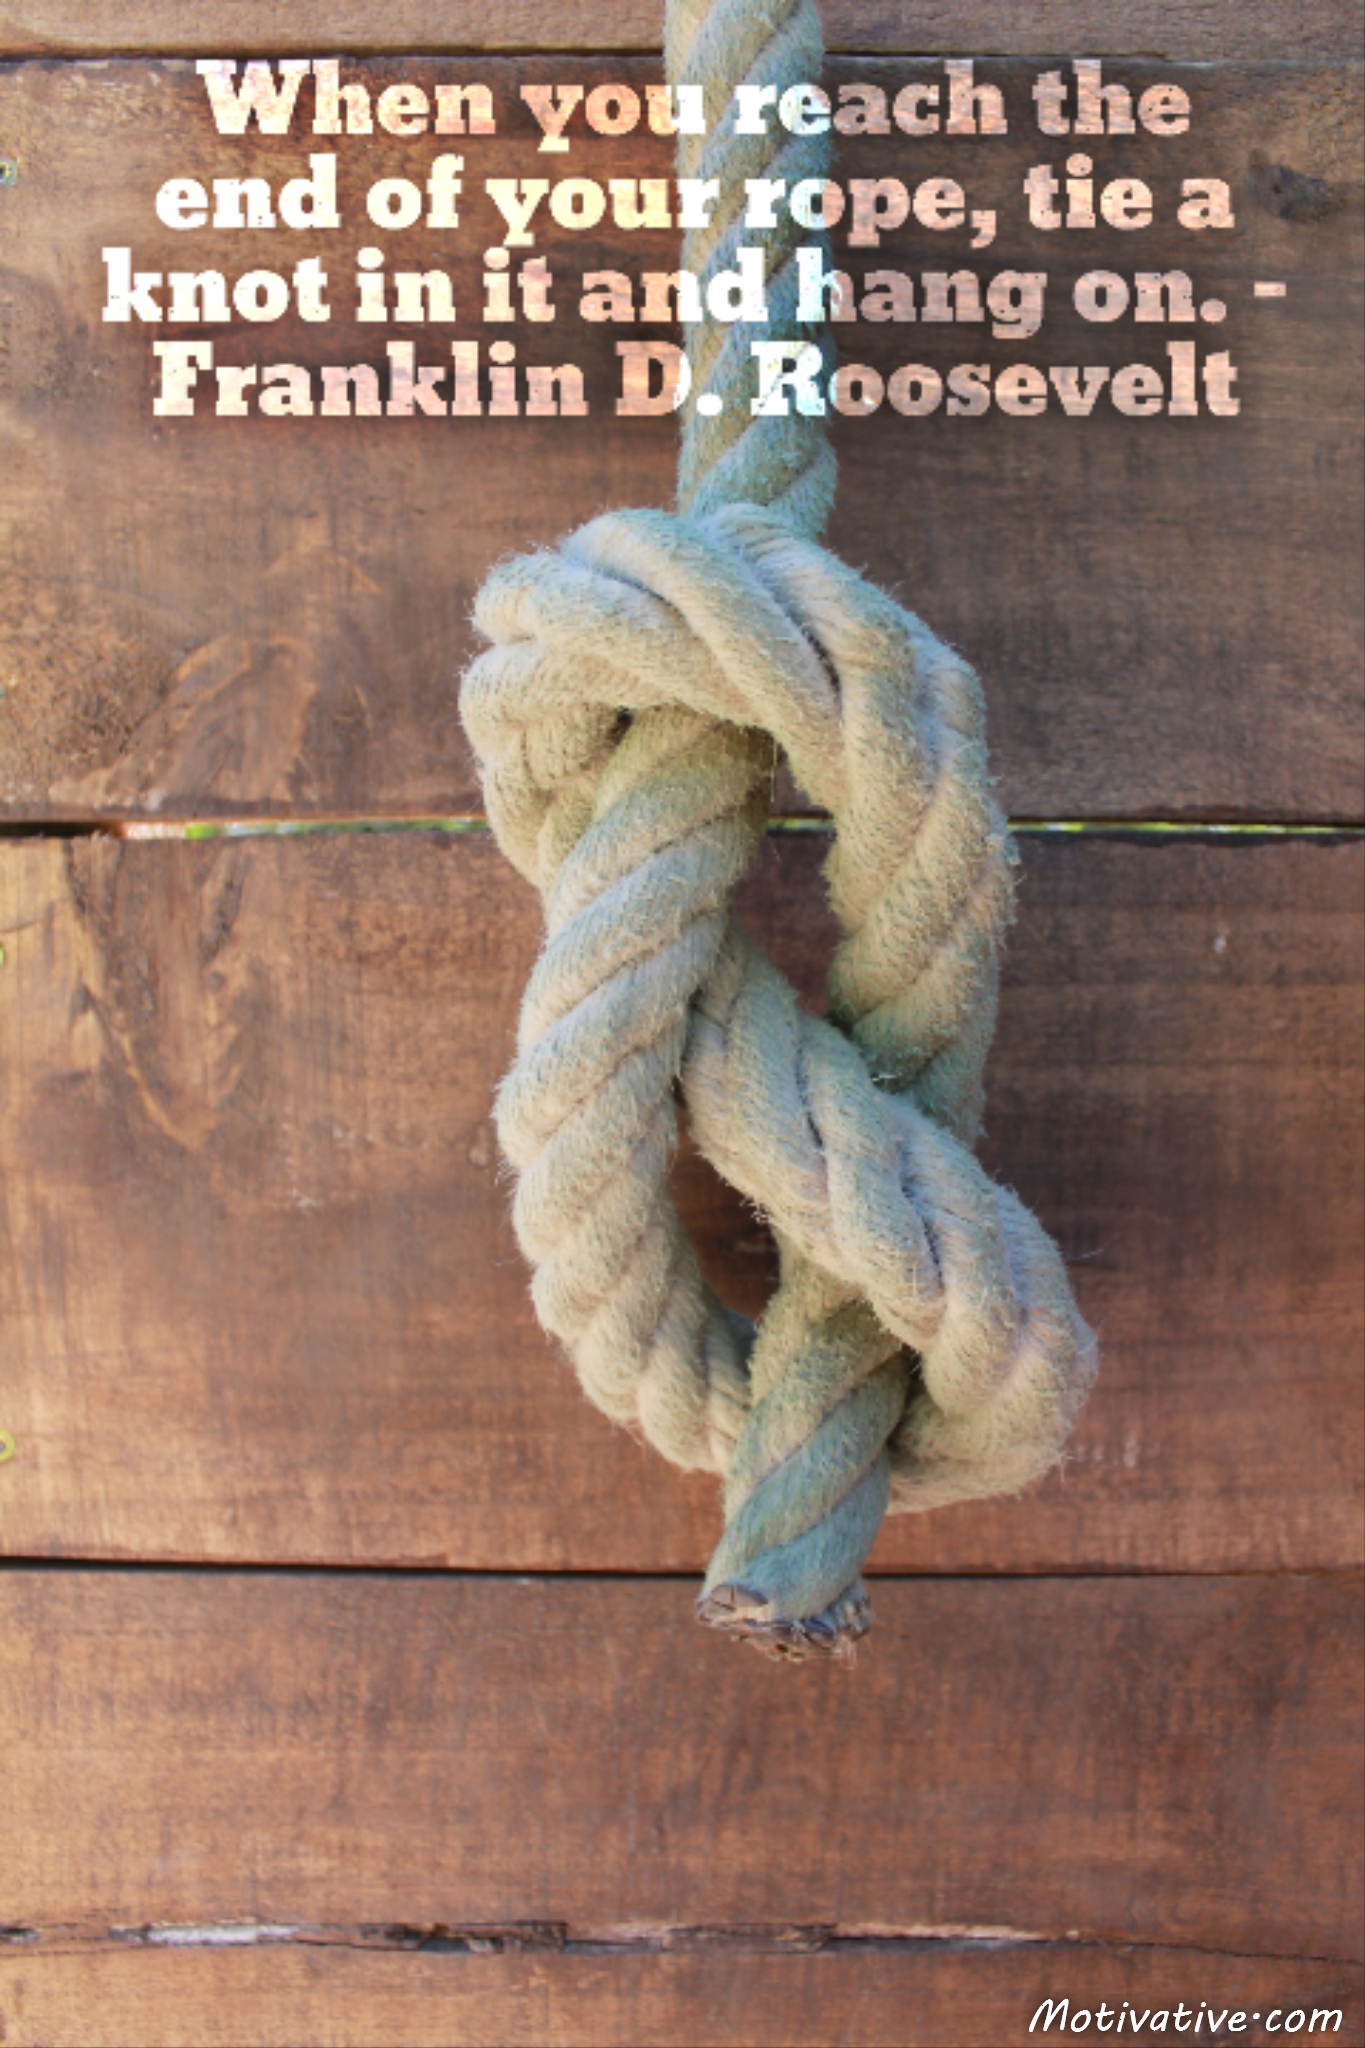 When you reach the end of your rope, tie a knot in it and hang on. – Franklin D. Roosevelt